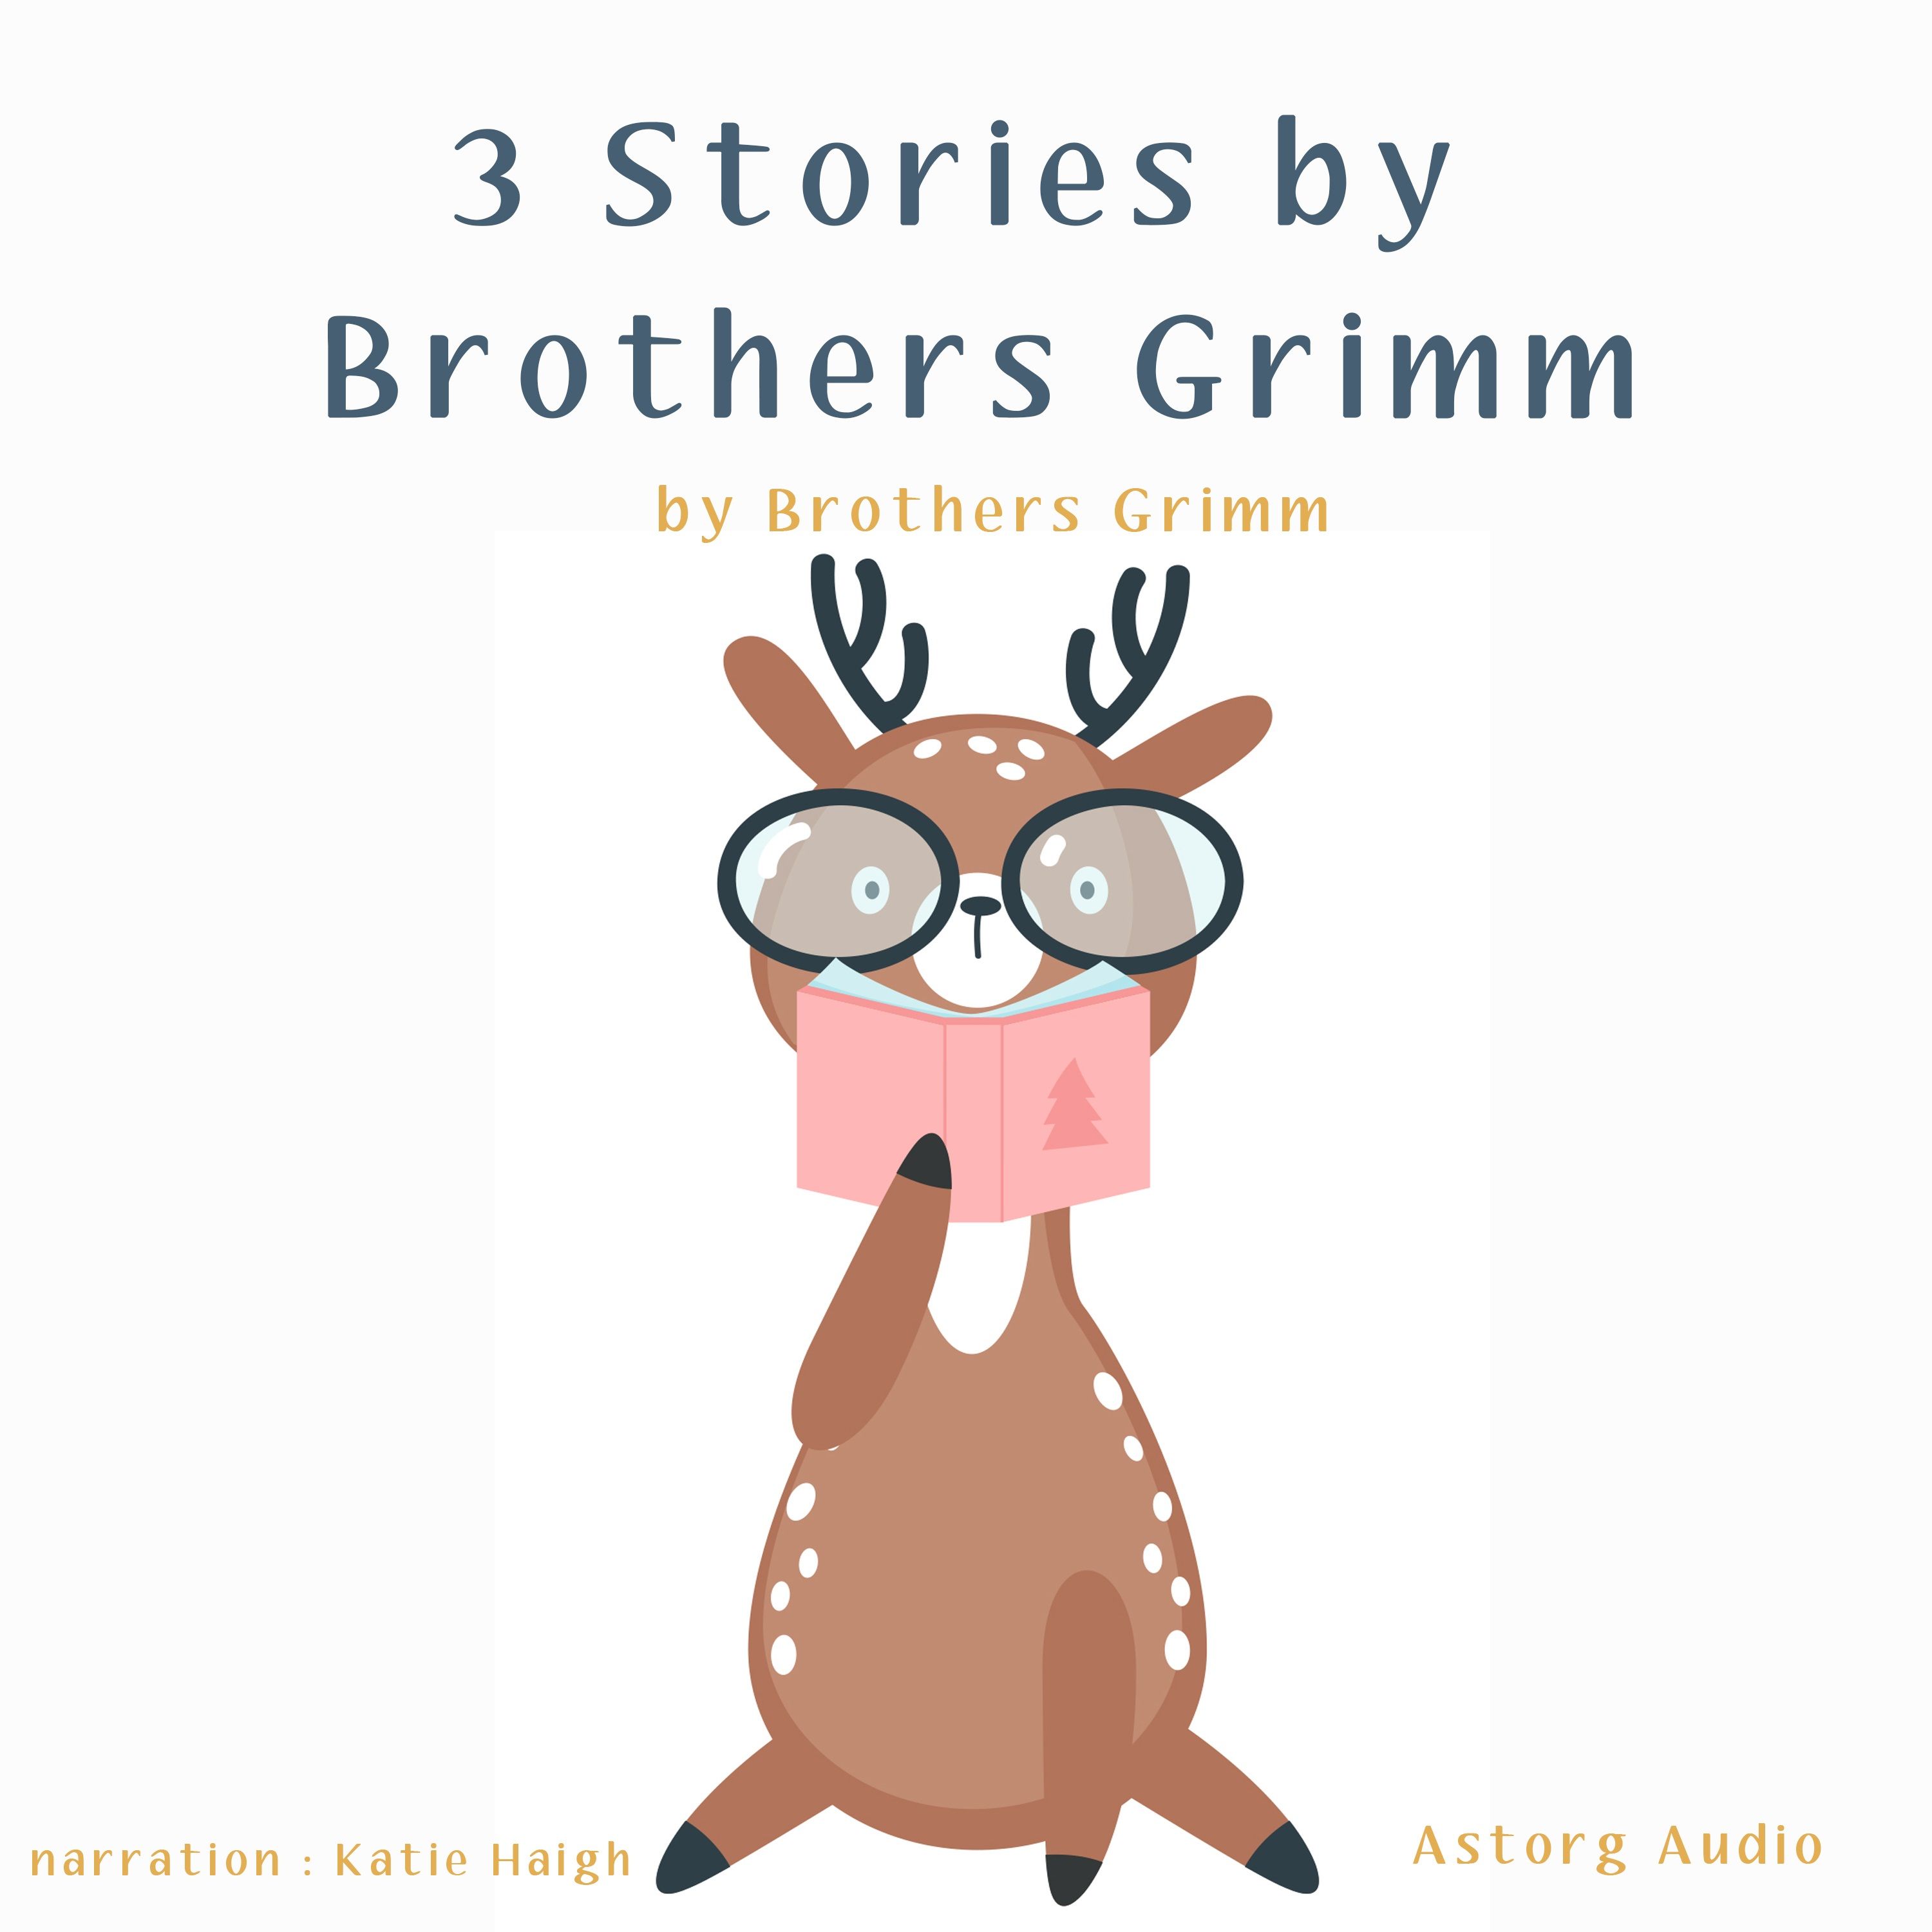 3 Stories by Brothers Grimm, audiobook by Brothers Grimm